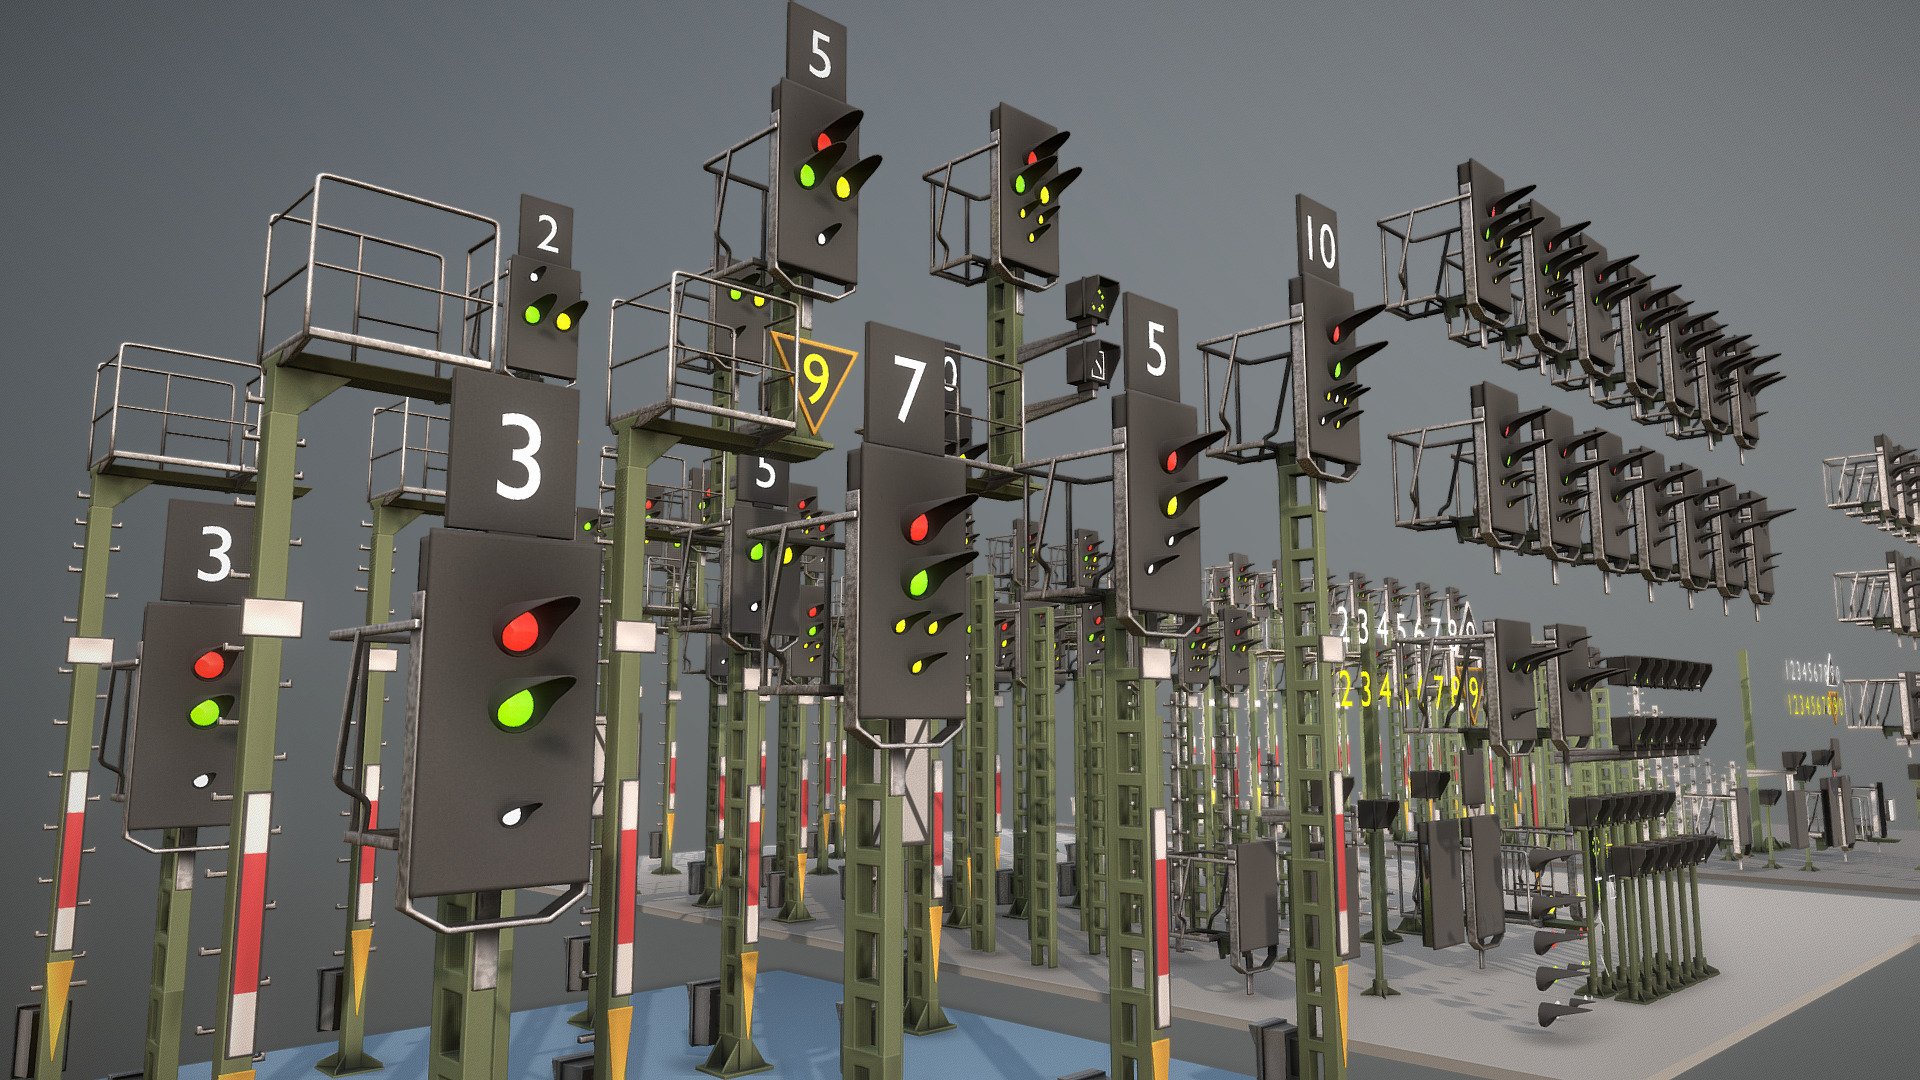 Here is a construction-set for ks railway signals with 157 parts to creat your own railway signal (180.000 polygons per set).
PBR-Textures in 8k res. wip-1 | wip-2 | High-Poly Version | wip-4

Viewpoints:




Some test results.

All modular parts with pbr textures. Available in additional file download

All modular parts optimised for shadeless use. One texture for everything! Interesting for mobile games or for applications how do not need PBR-Textures.Available in additional file download. All files have the ending &ldquo;vis